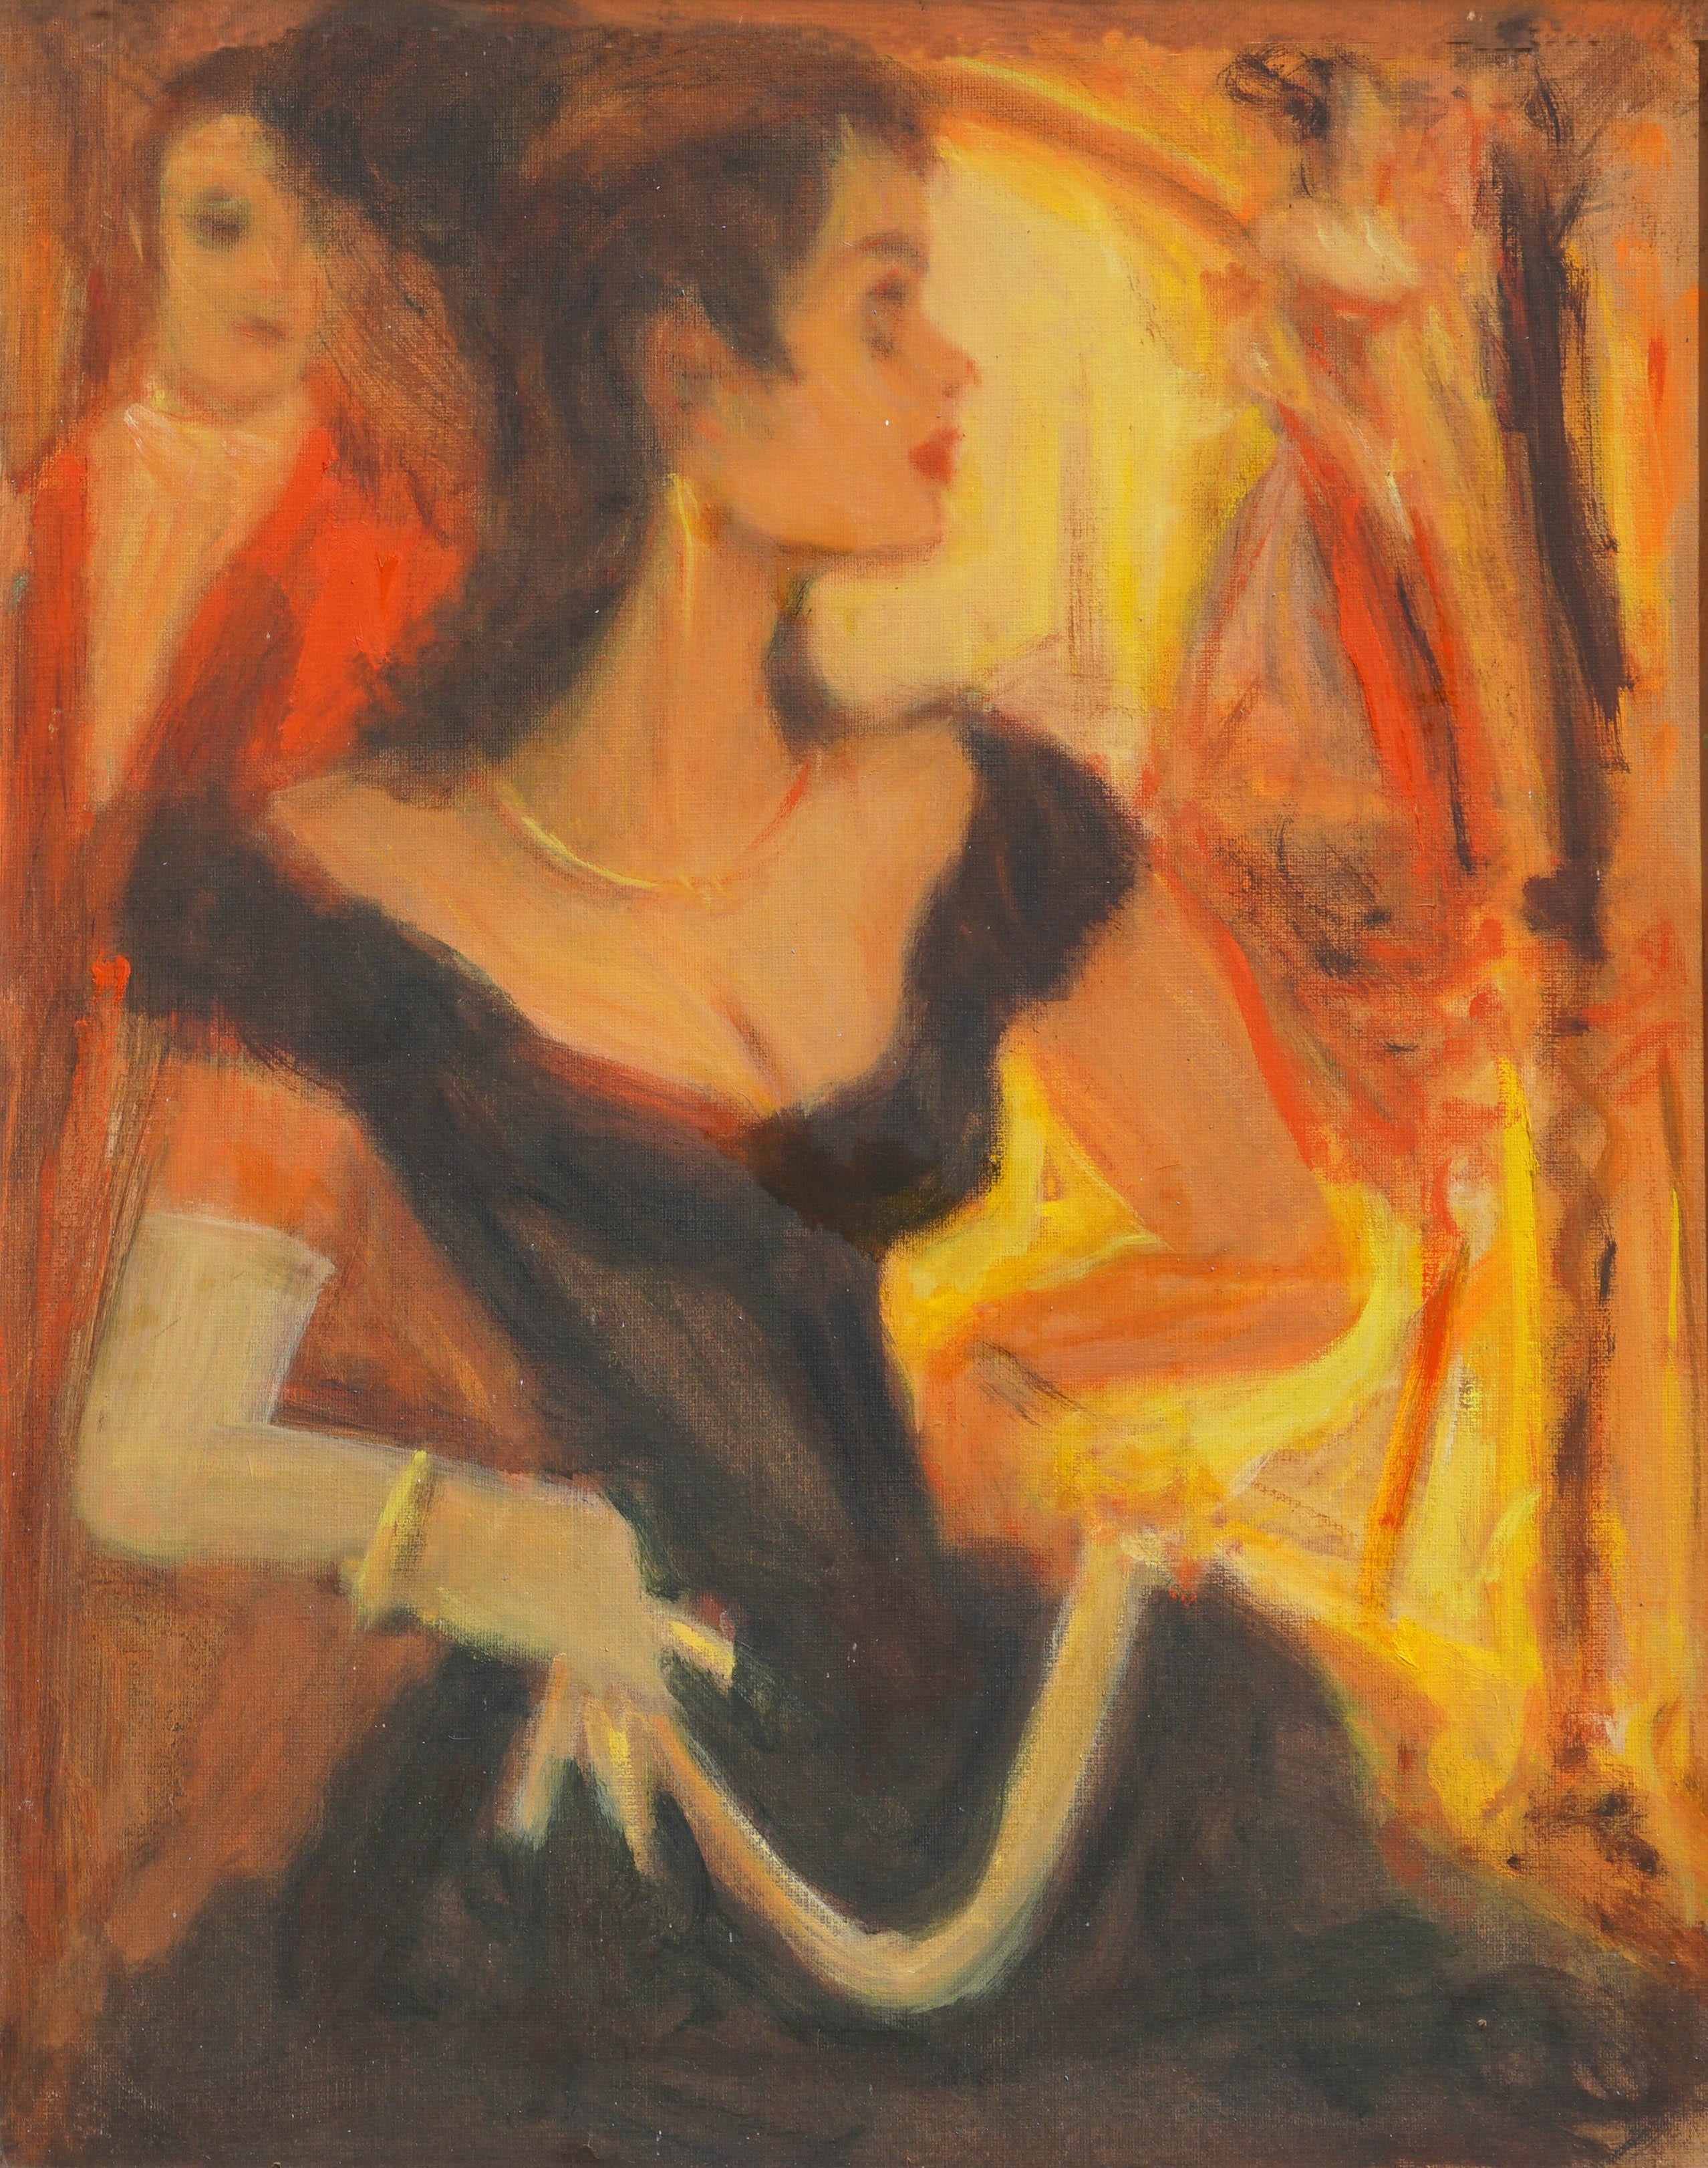 Woman in Black Dress Pulp Art Portrait/Couple Dancing Figurative, 2 sided  - Painting by Unknown